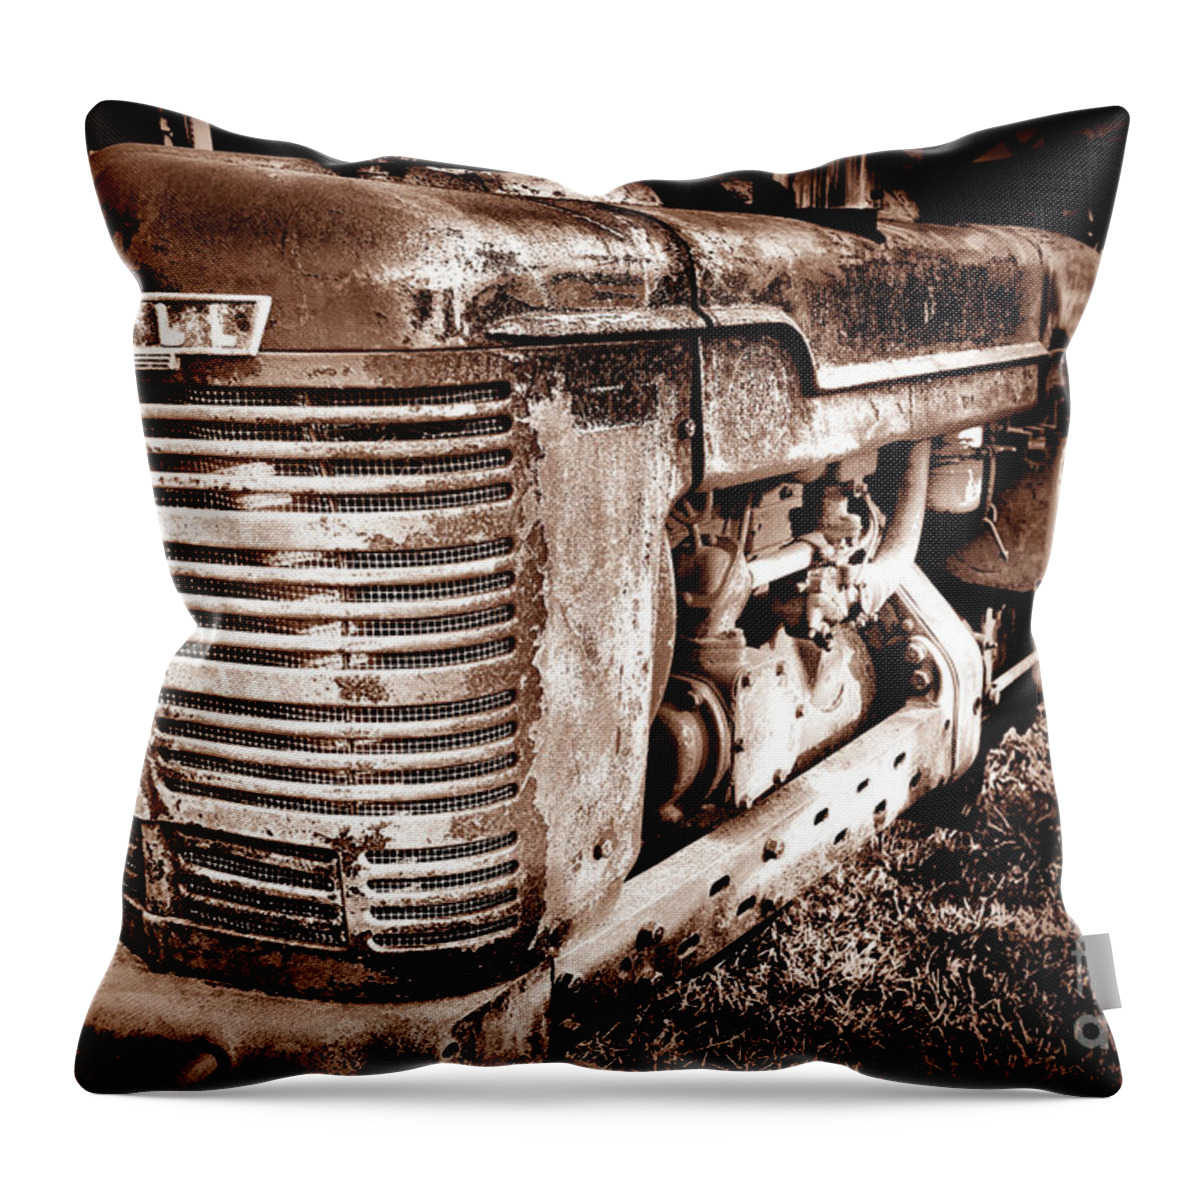 Mccormick Throw Pillow featuring the photograph Farmall H Grunge by Olivier Le Queinec